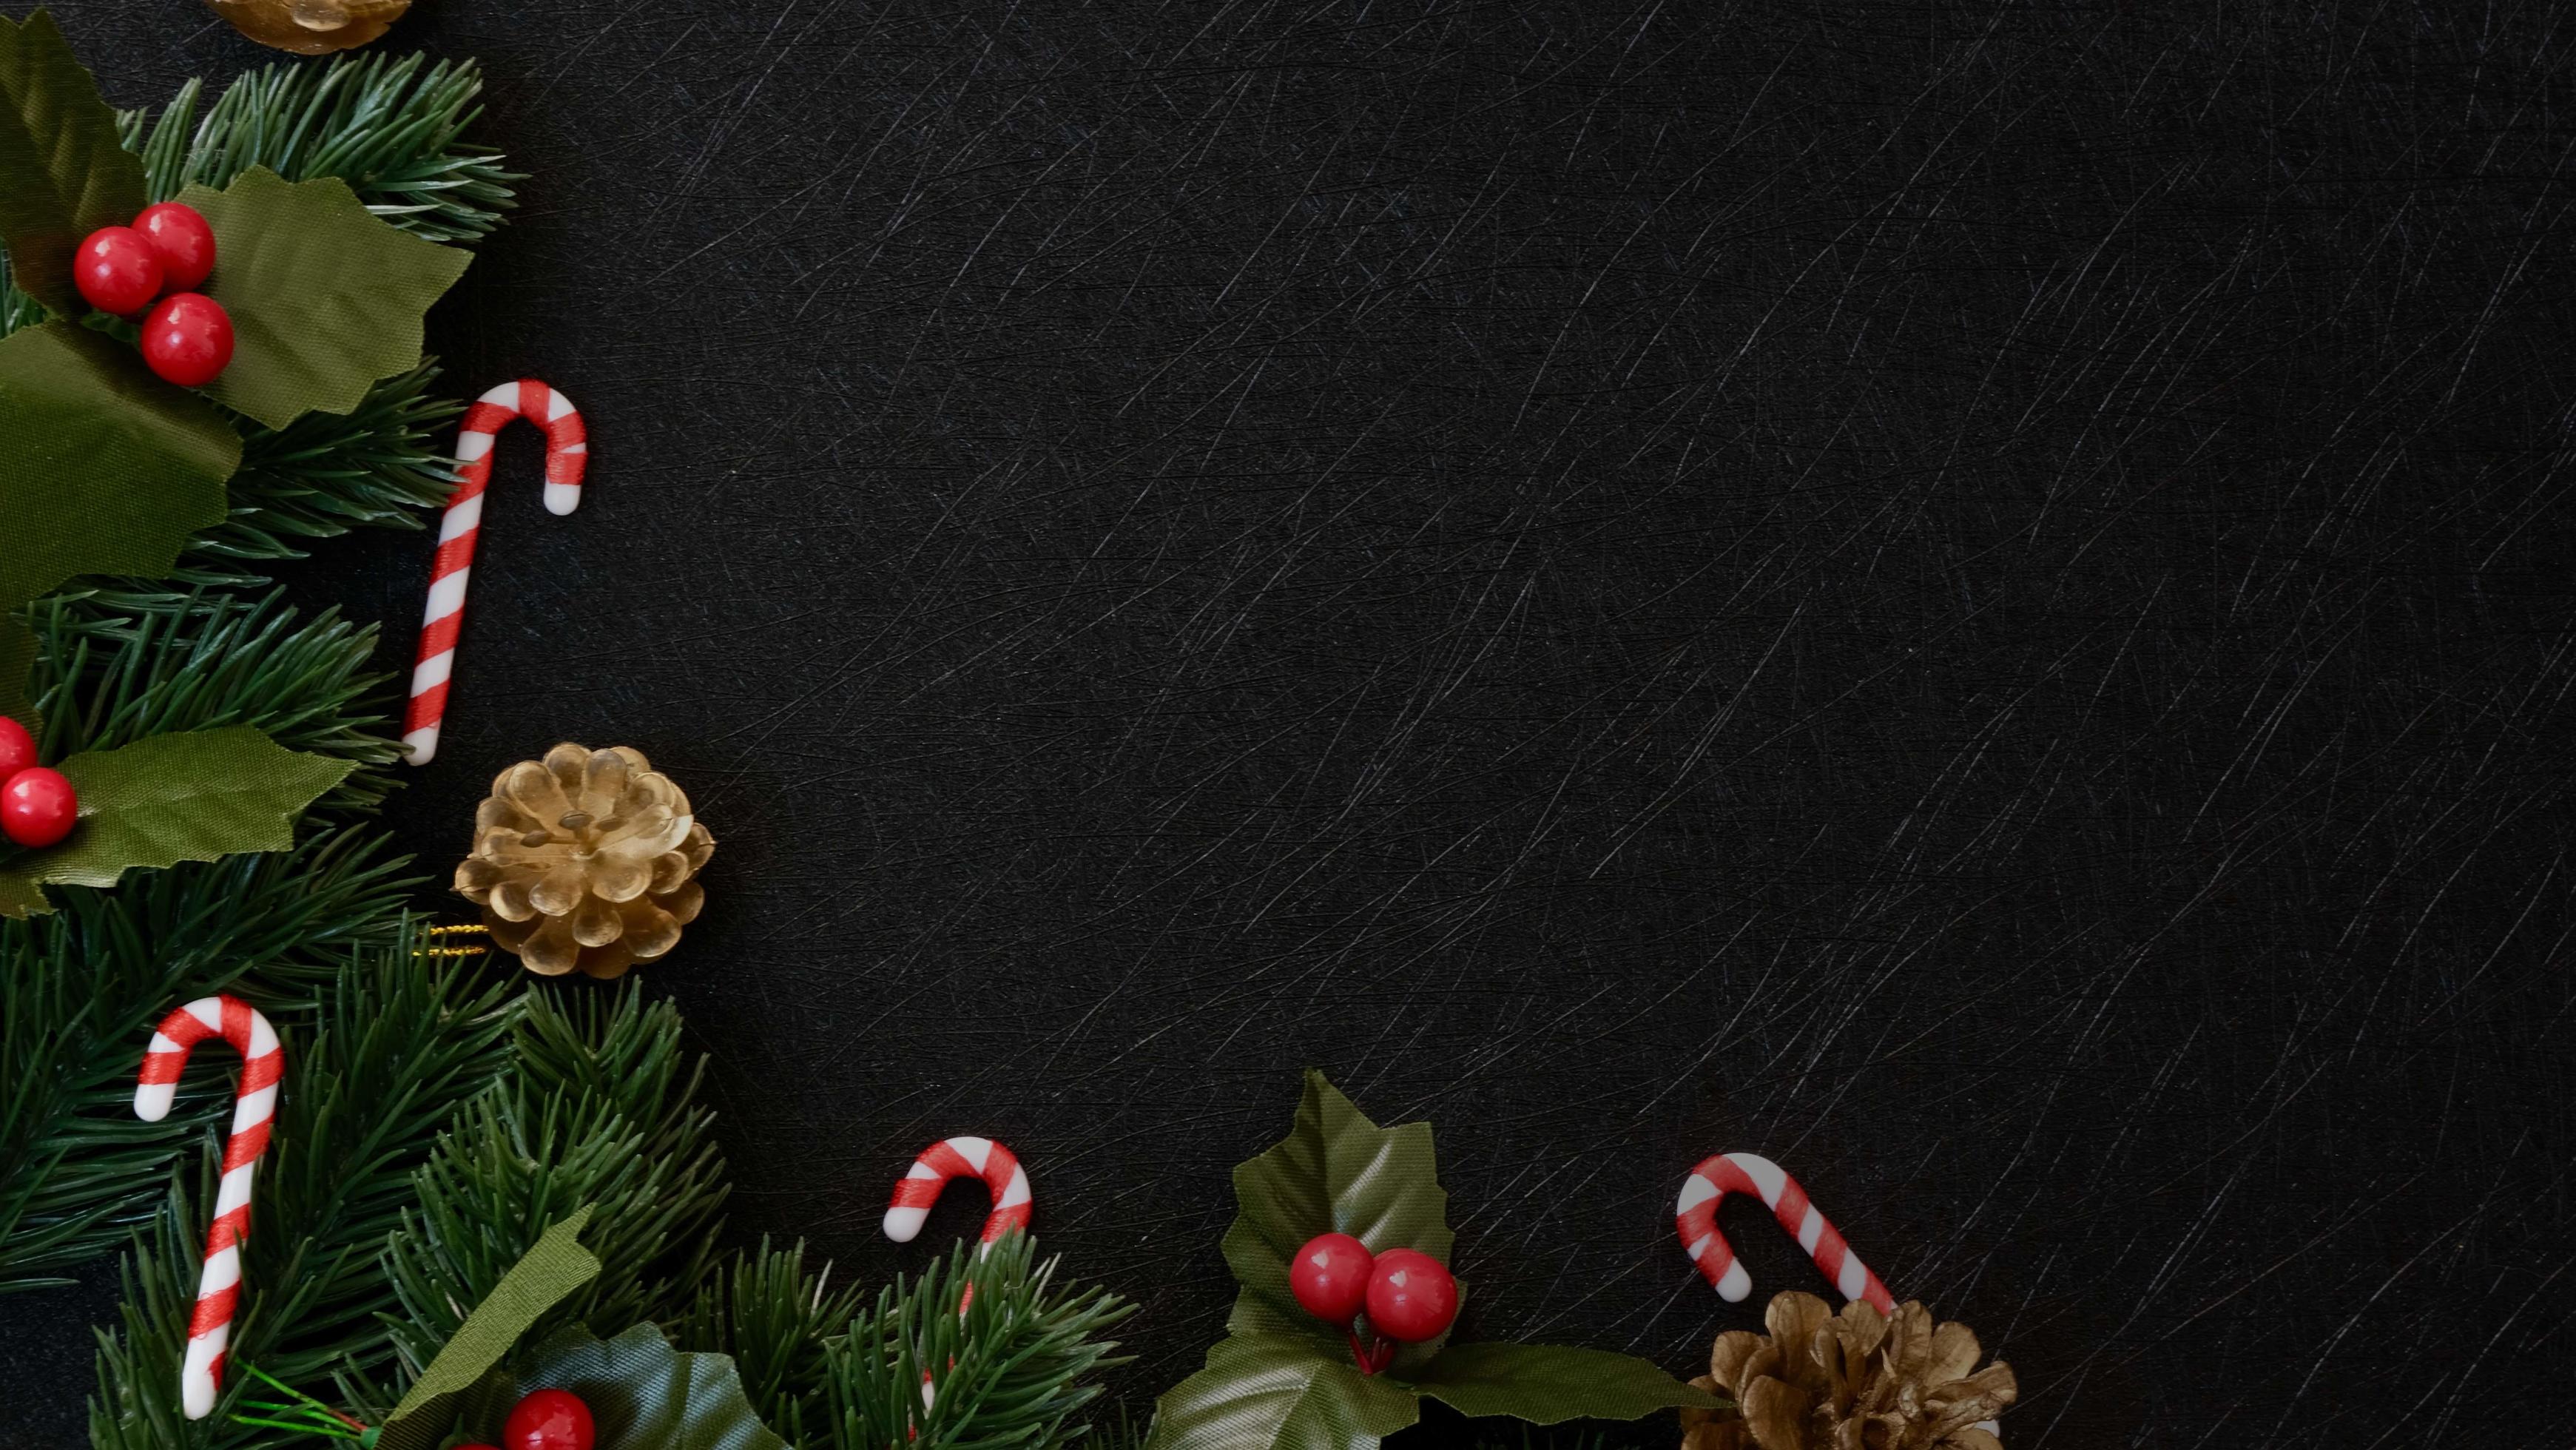 Top view christmas decorations, pine tree fir leaves, candy cane and red berries on dark black textured background